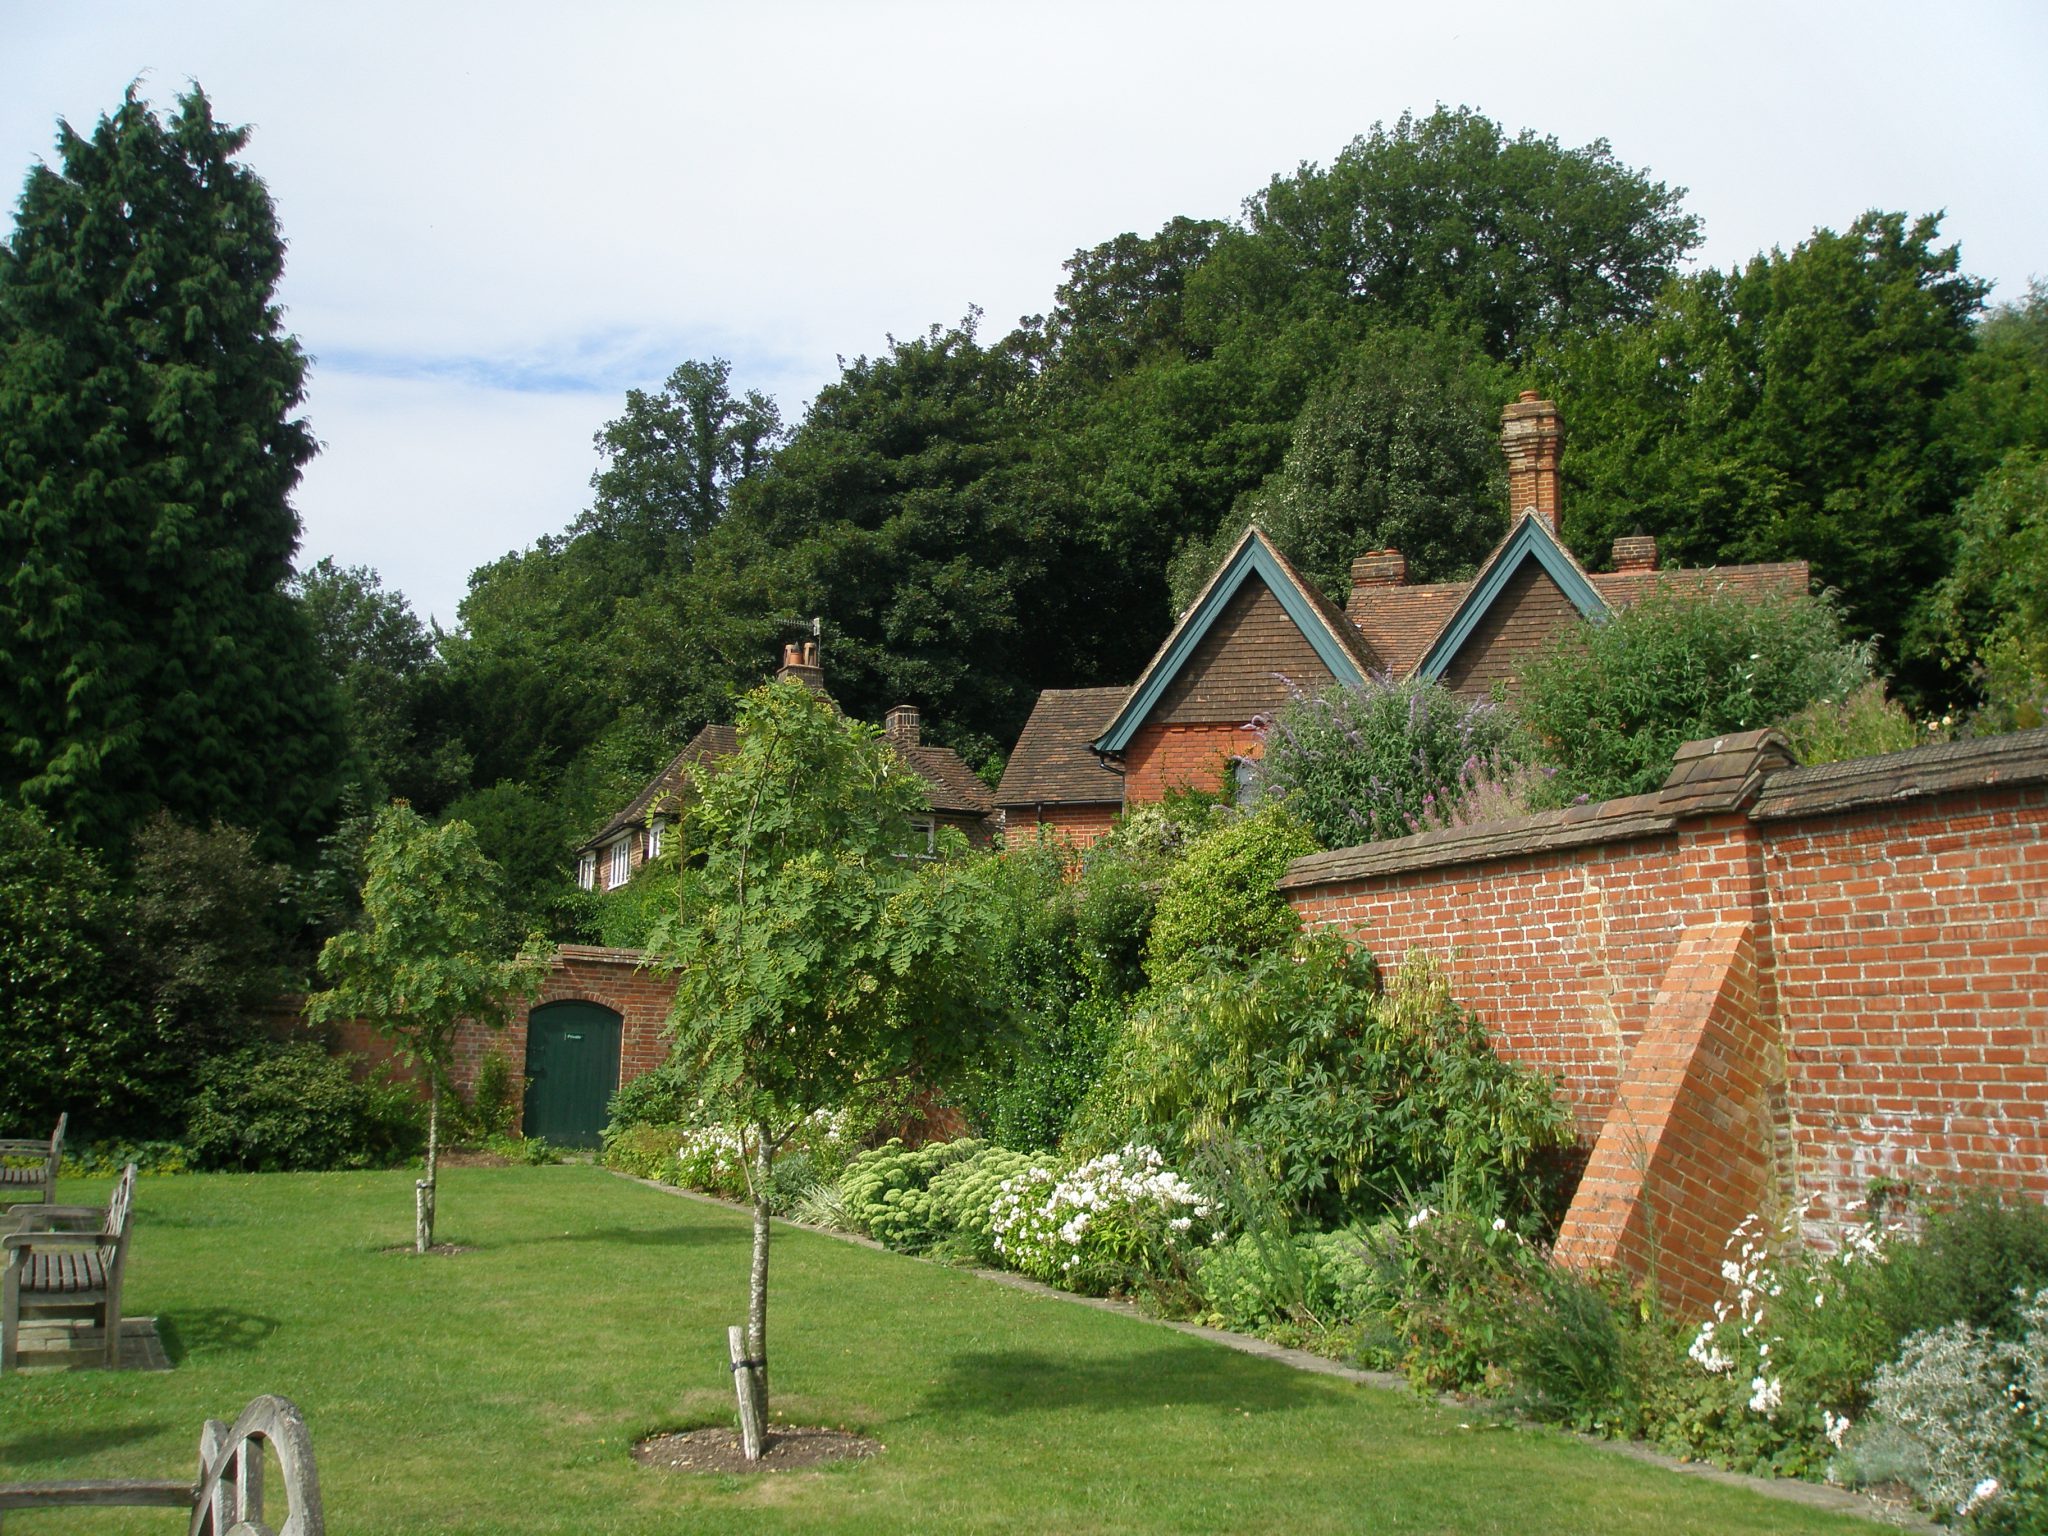 Buttressed brick walls enclose the Orchard. A row of Kentish-tile-hung cottages is behind the wall. Clementine referred to these as "her village."